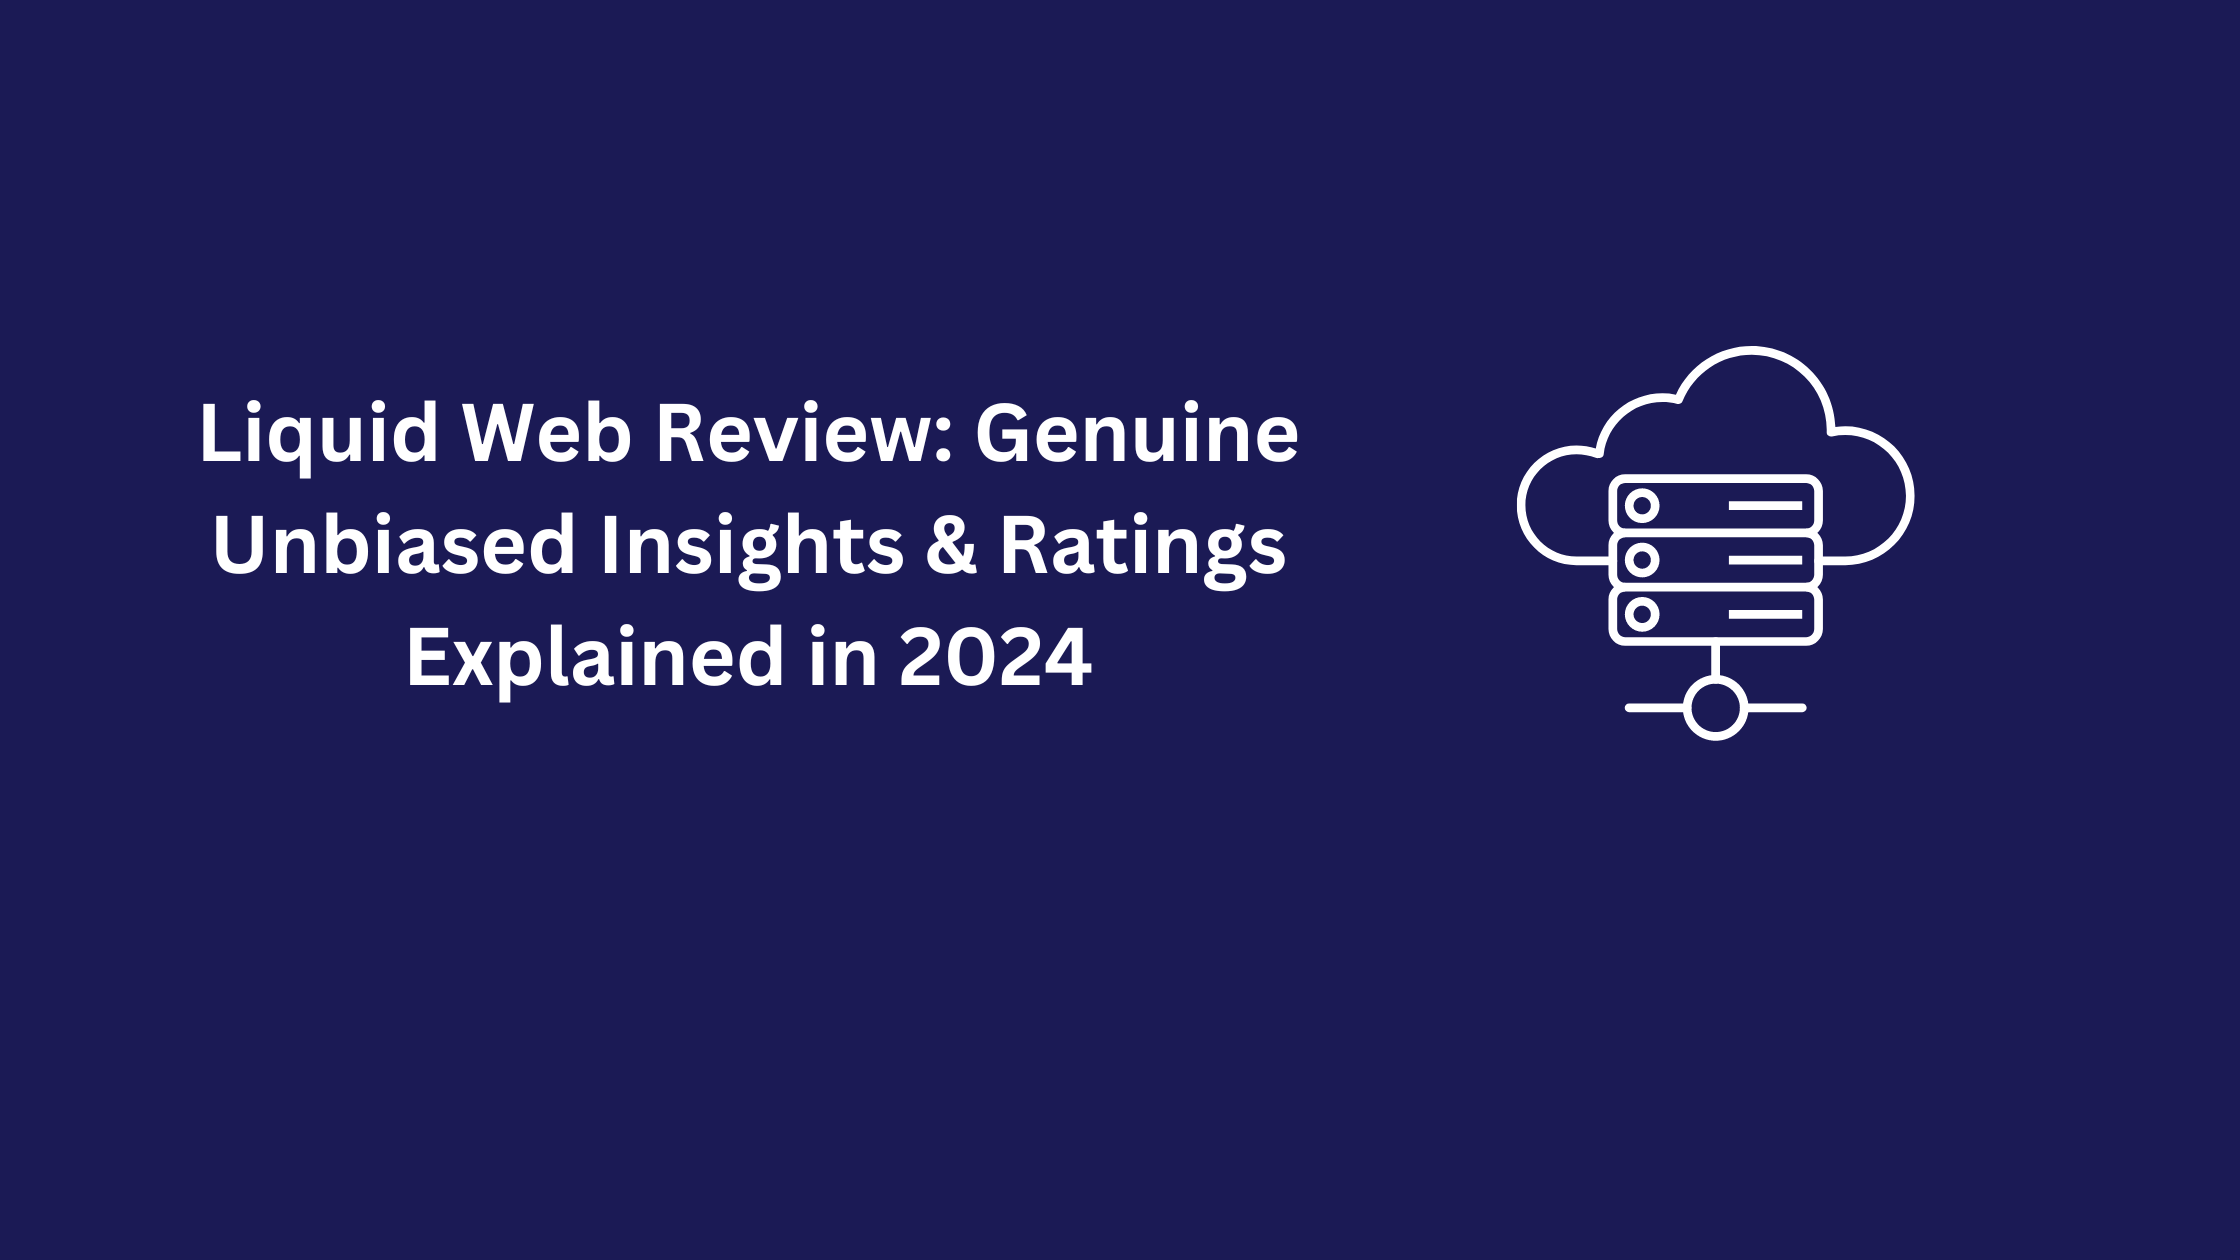 Liquid Web Review: Genuine Unbiased Insights & Ratings Explained in 2024